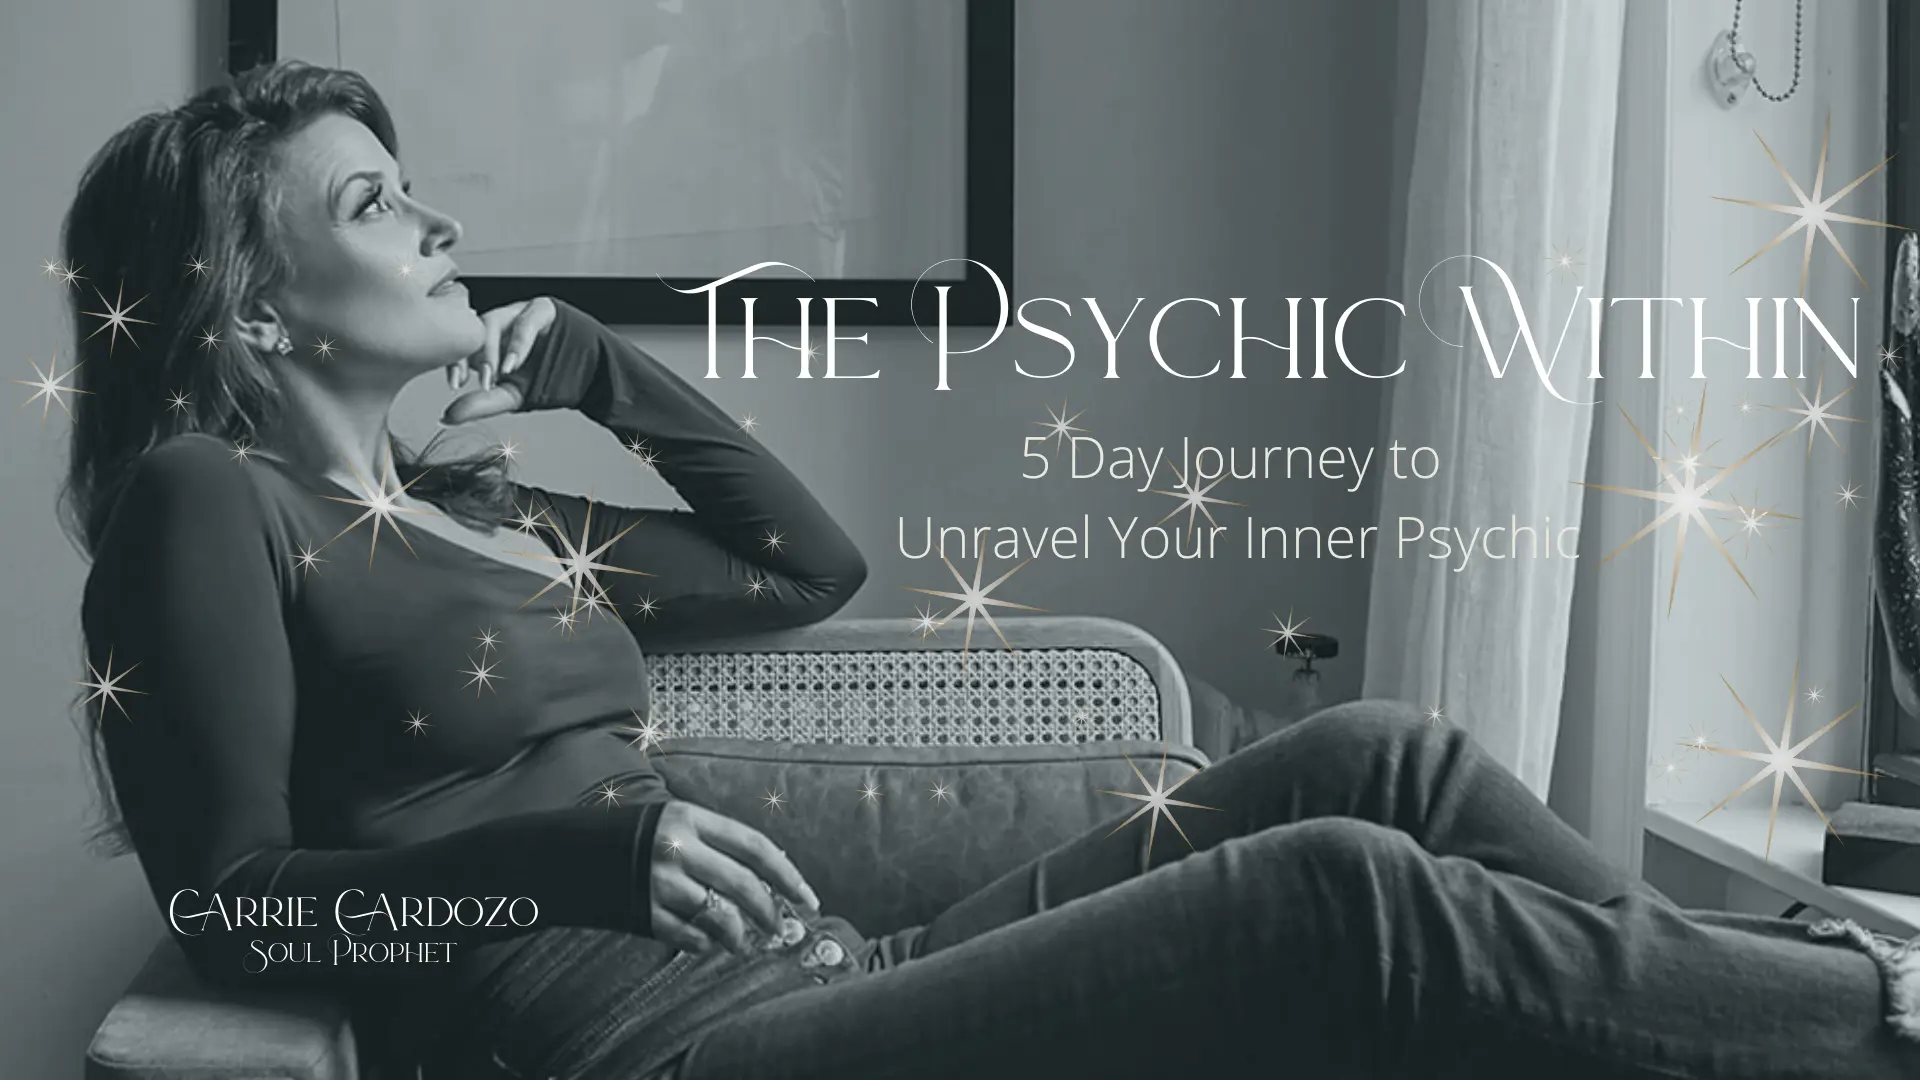 The Psychic Within 5 Day Journey to Unravel Your Inner Psychic 2022 - Carrie Cardoz